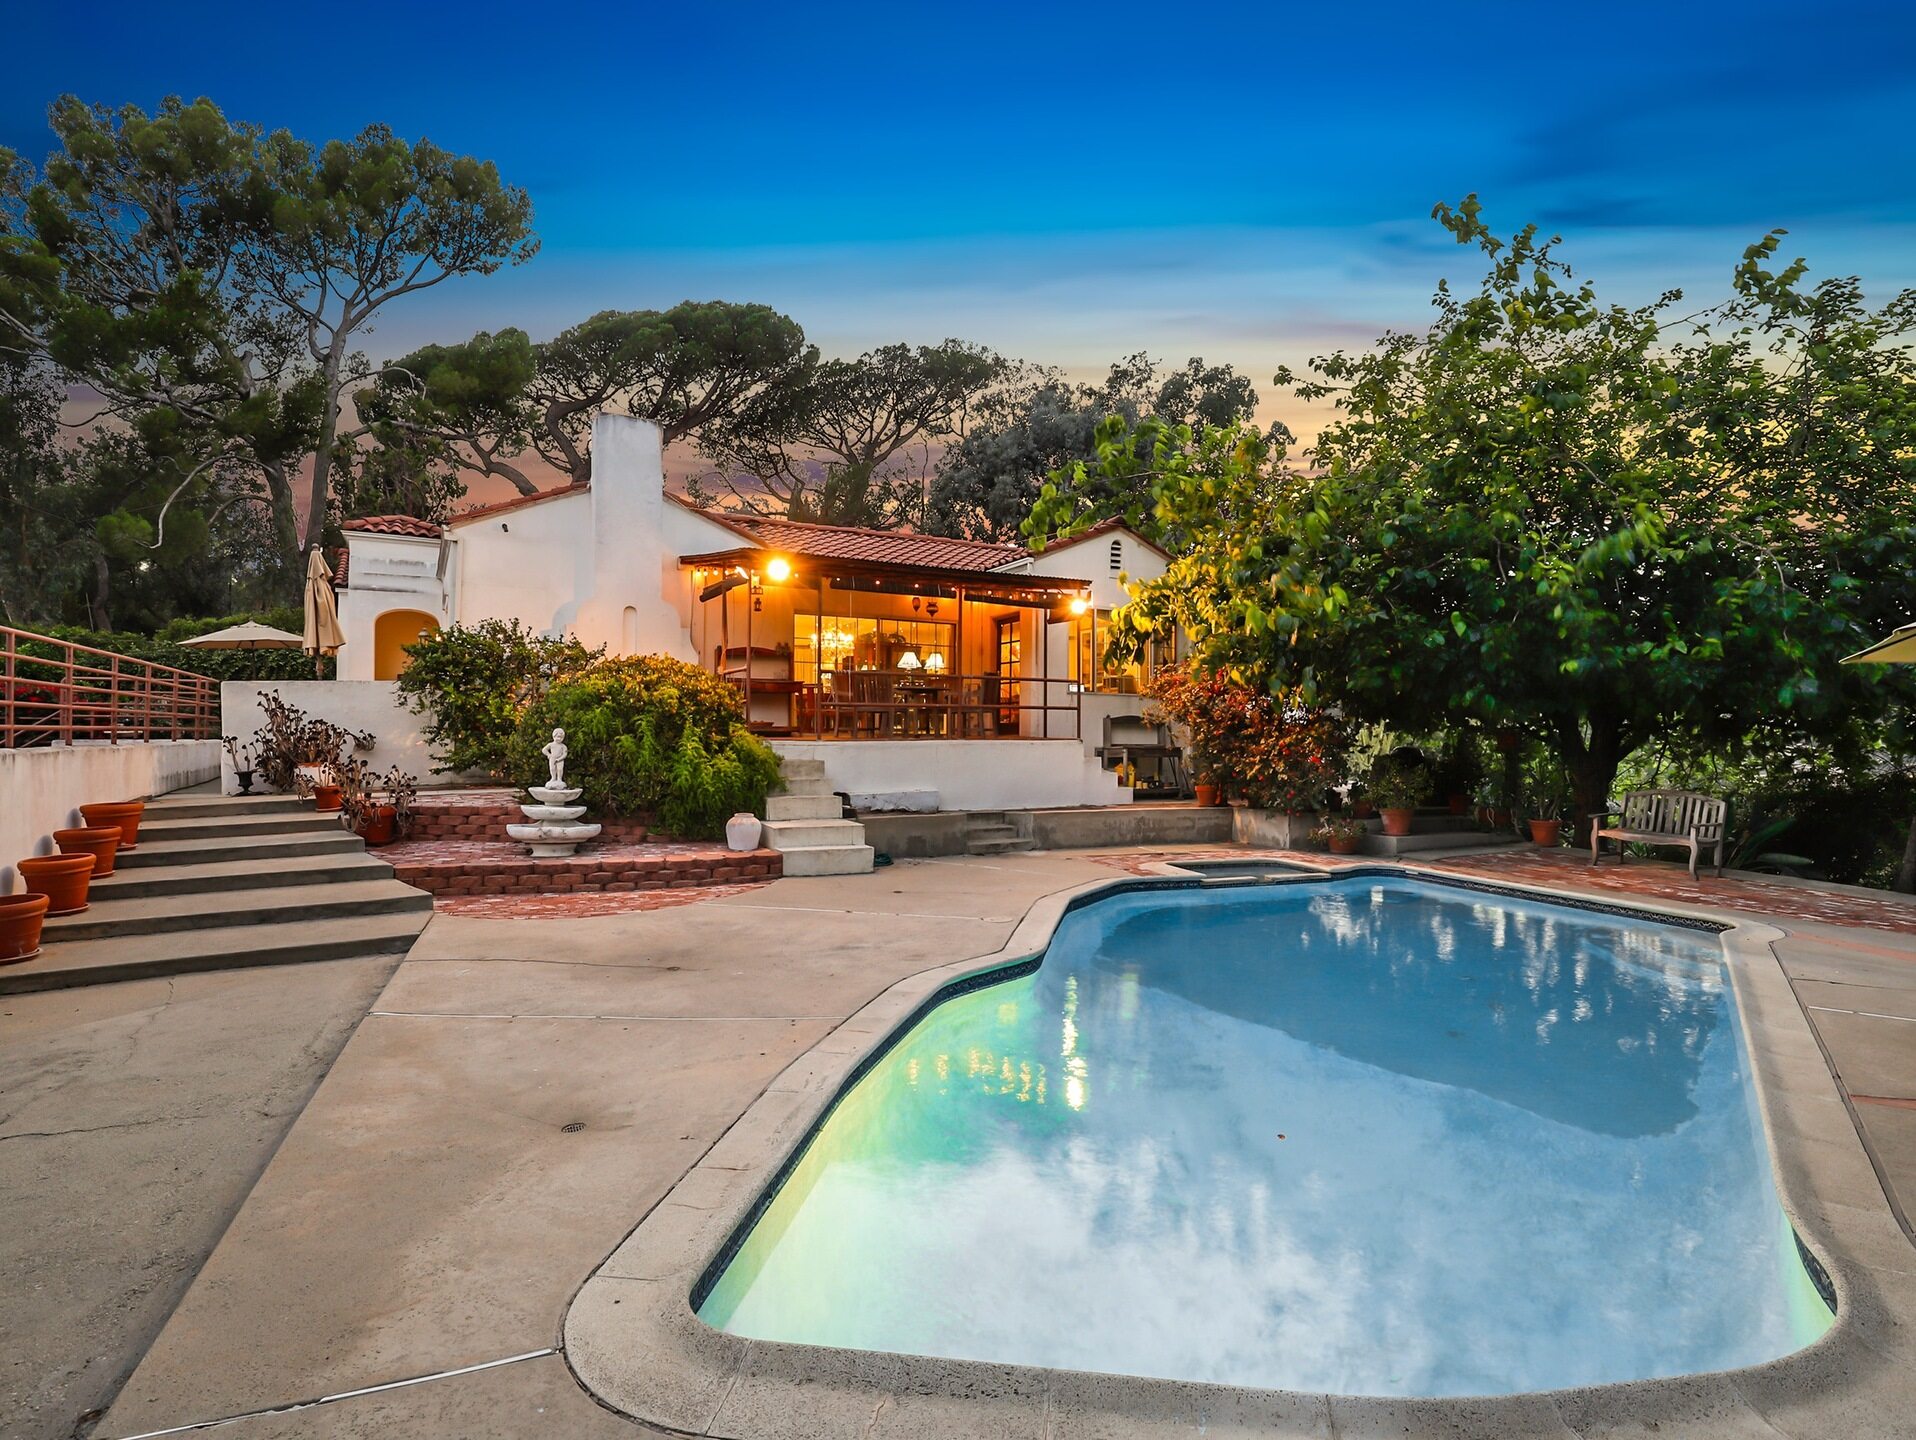 The house where Manson's gang murdered two people is up for sale.  There are photos